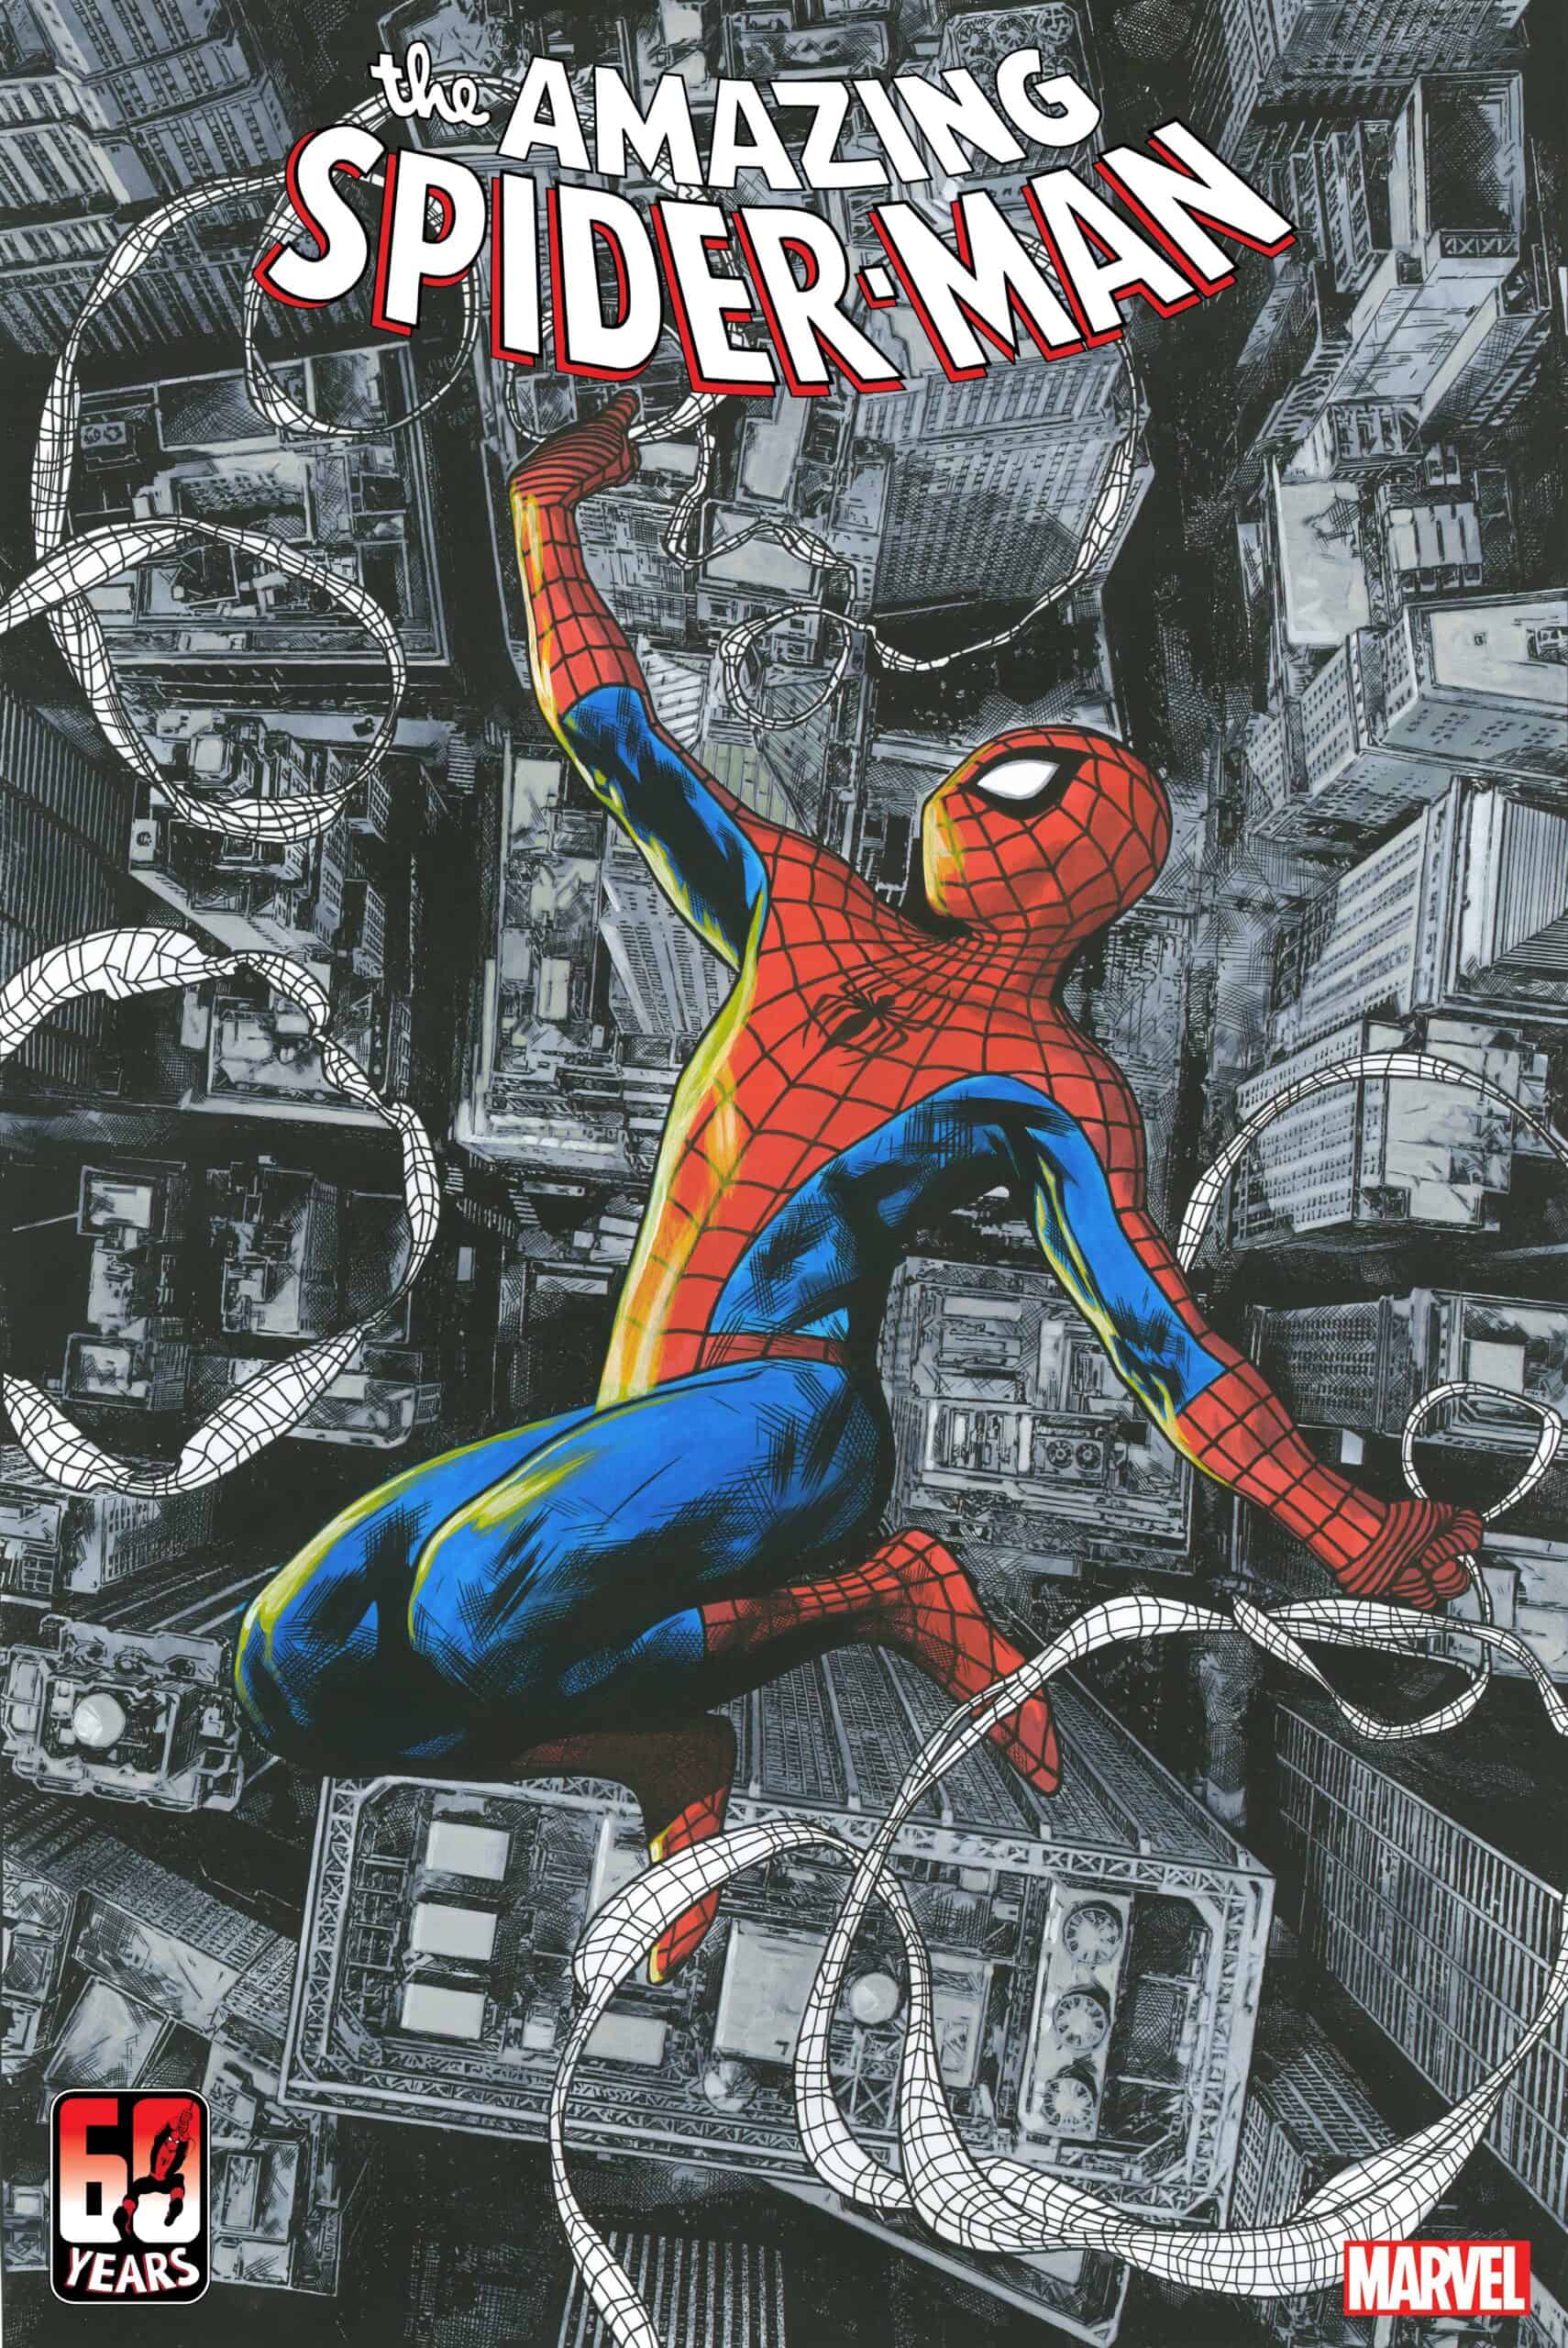 NEWS WATCH: Marvel Releases Variant Covers for THE AMAZING SPIDER-MAN #1 Out April 6, 2022 - Comic Watch